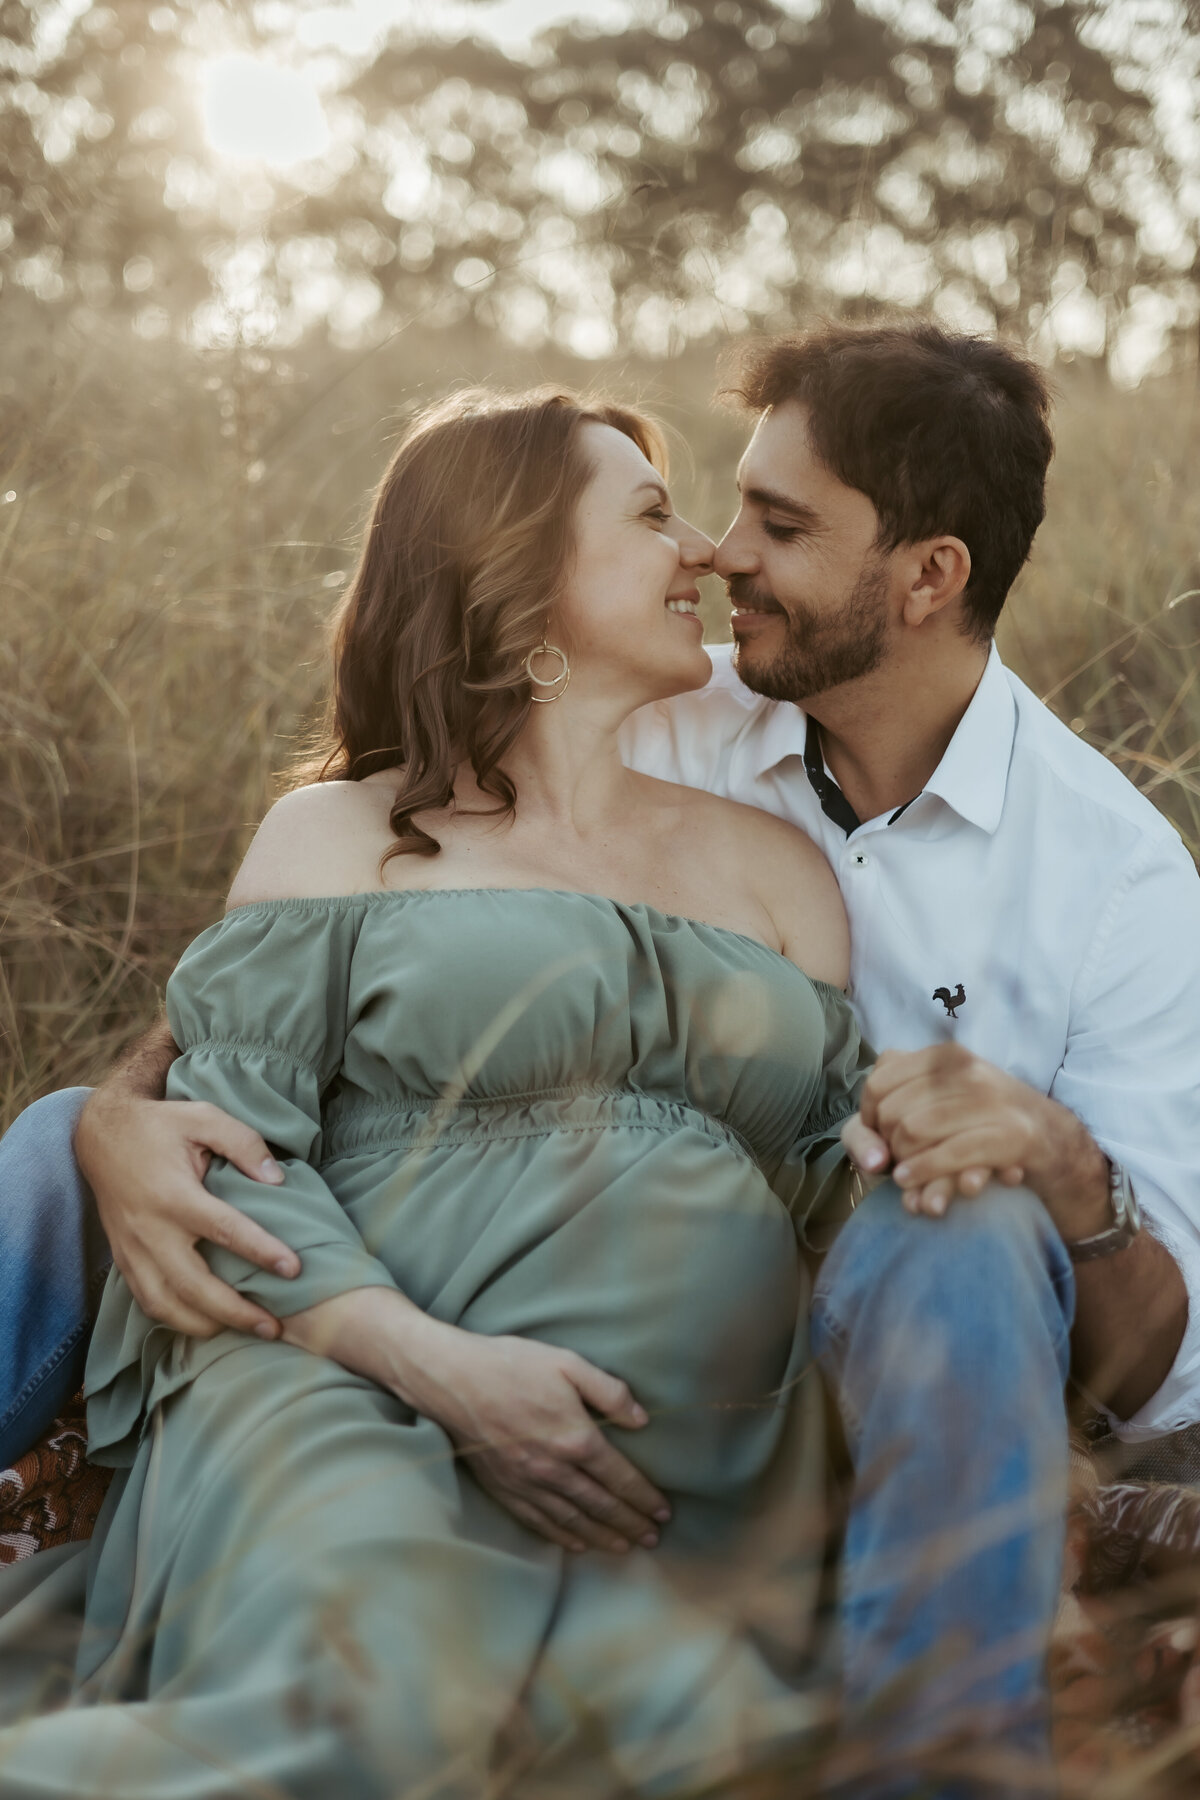 Excited parents-to-be sitting together in a gorgeous outdoor location for their maternity photoshoot smiling and their noses touching looking so happy